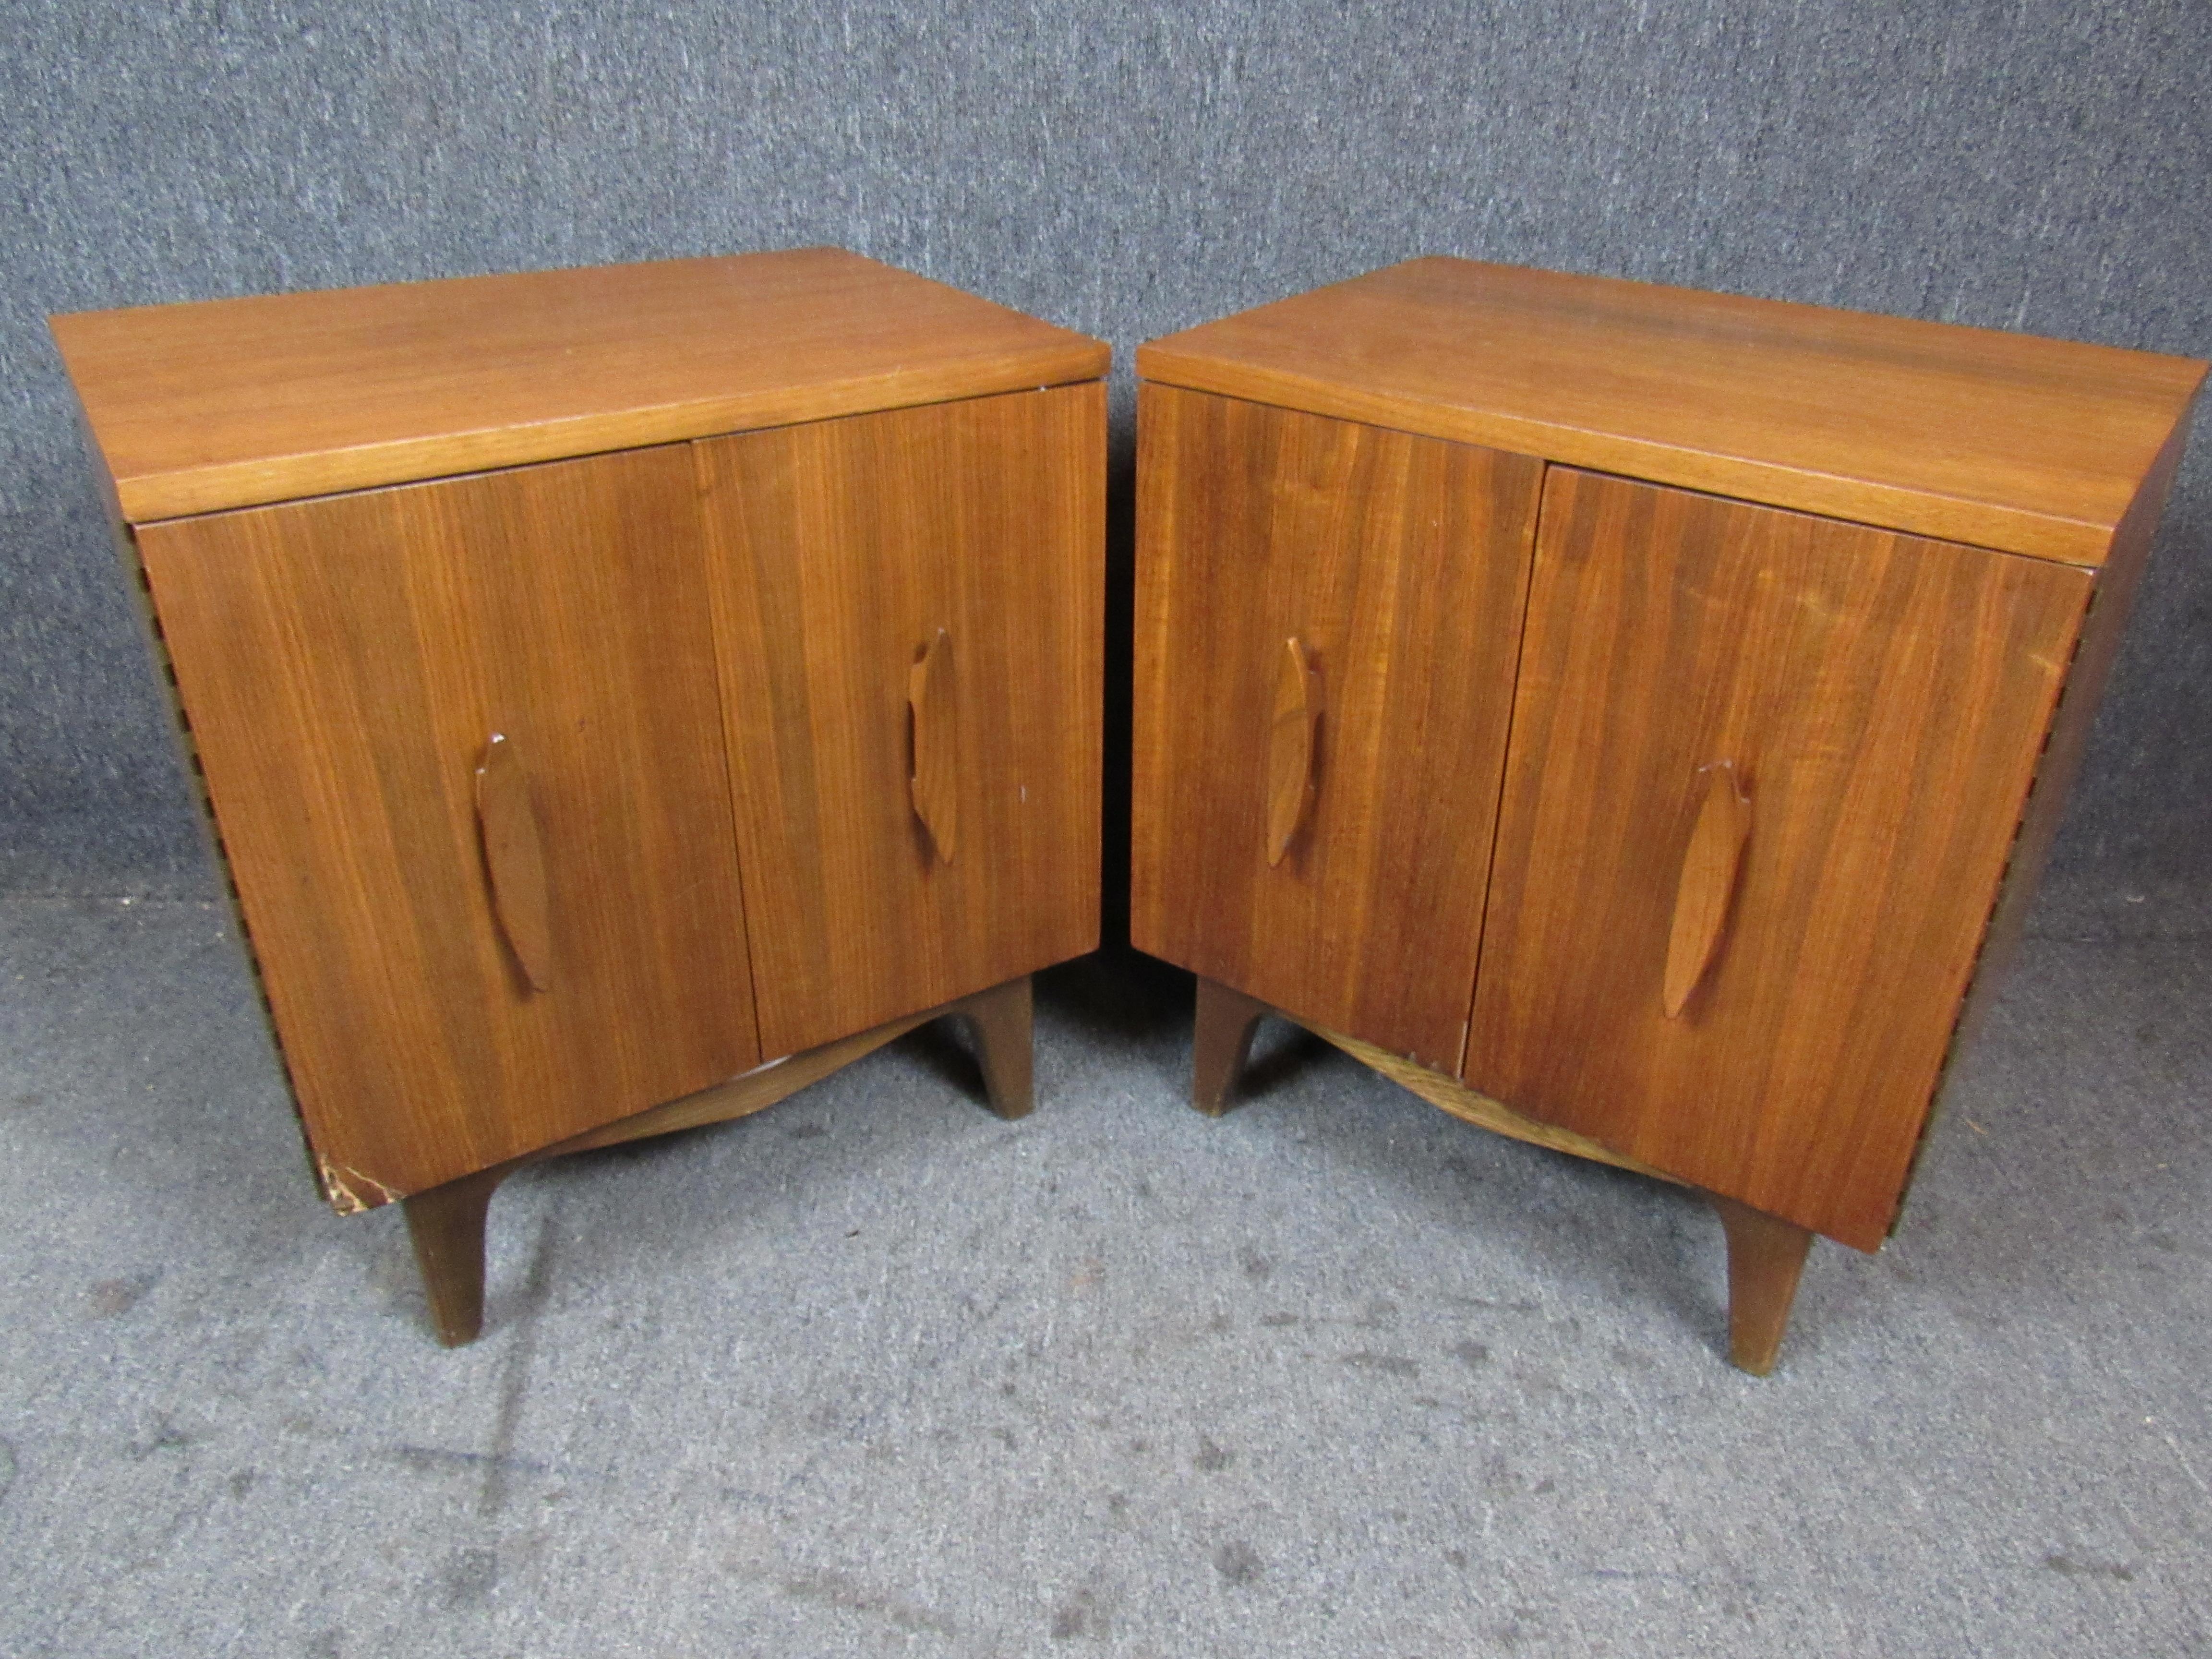 Wonderful pair of Mid-Century Modern featuring the authentic vintage patina that makes this style so desirable. Featuring sleekly sculpted canoe-like pulls and funky carved zig-zag legs, these cute little cabinets are sure to make a lasting